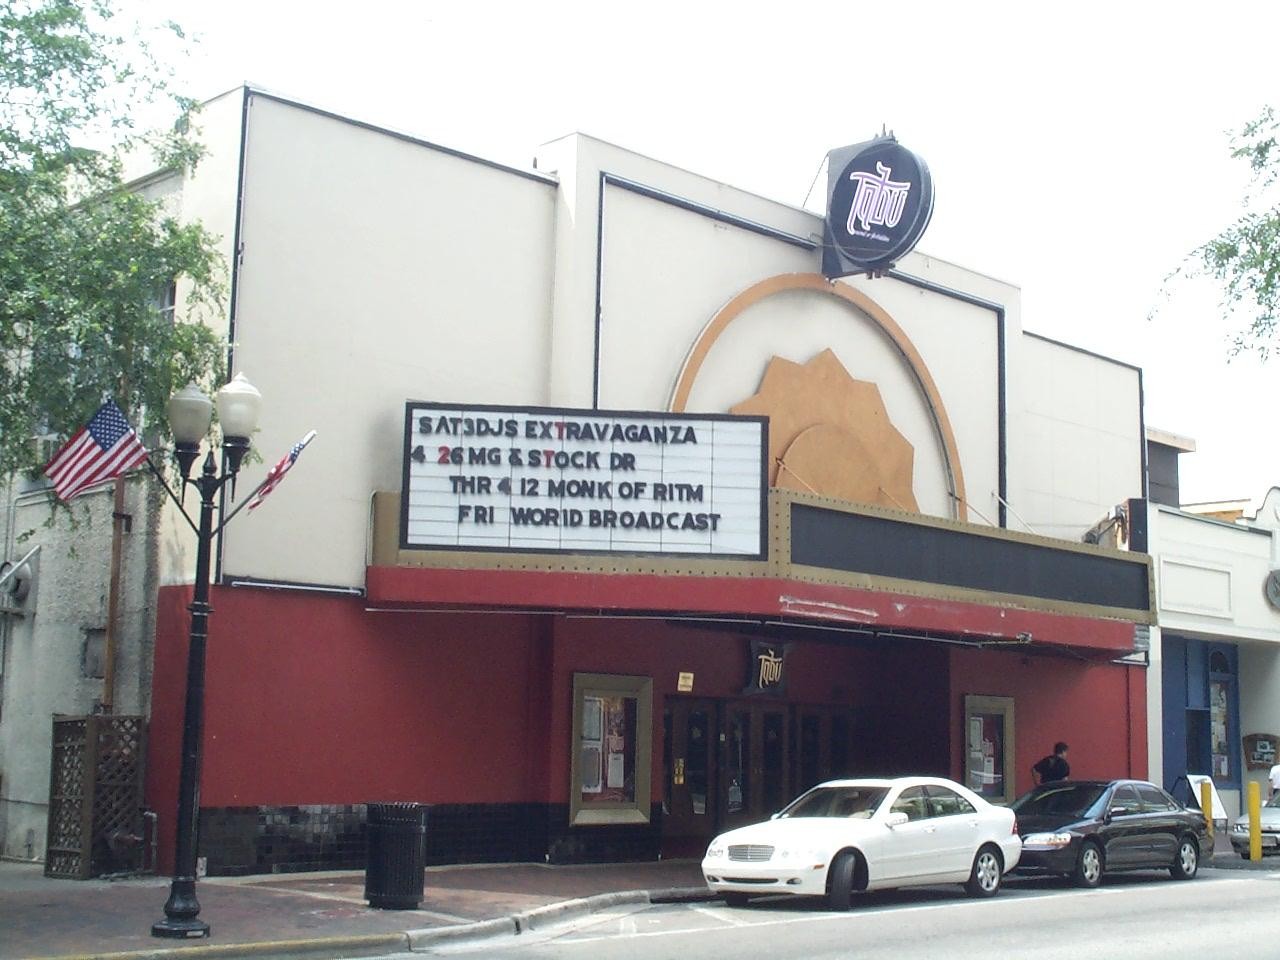 Beacham Theatre
46 N. Orange Ave. 
As Orlando&#146;s first theater, the Beacham was built in 1921 by Braxton Beacham Sr. Underneath the theater, there was a tunnel which allowed performers to easily get to the hotel across the street. While the venue has changed names a few times, over the years, it has hosted vaudeville acts, first-run movies, live music, and is now a nightclub and has live shows.
Photo via RICHES of Central Florida